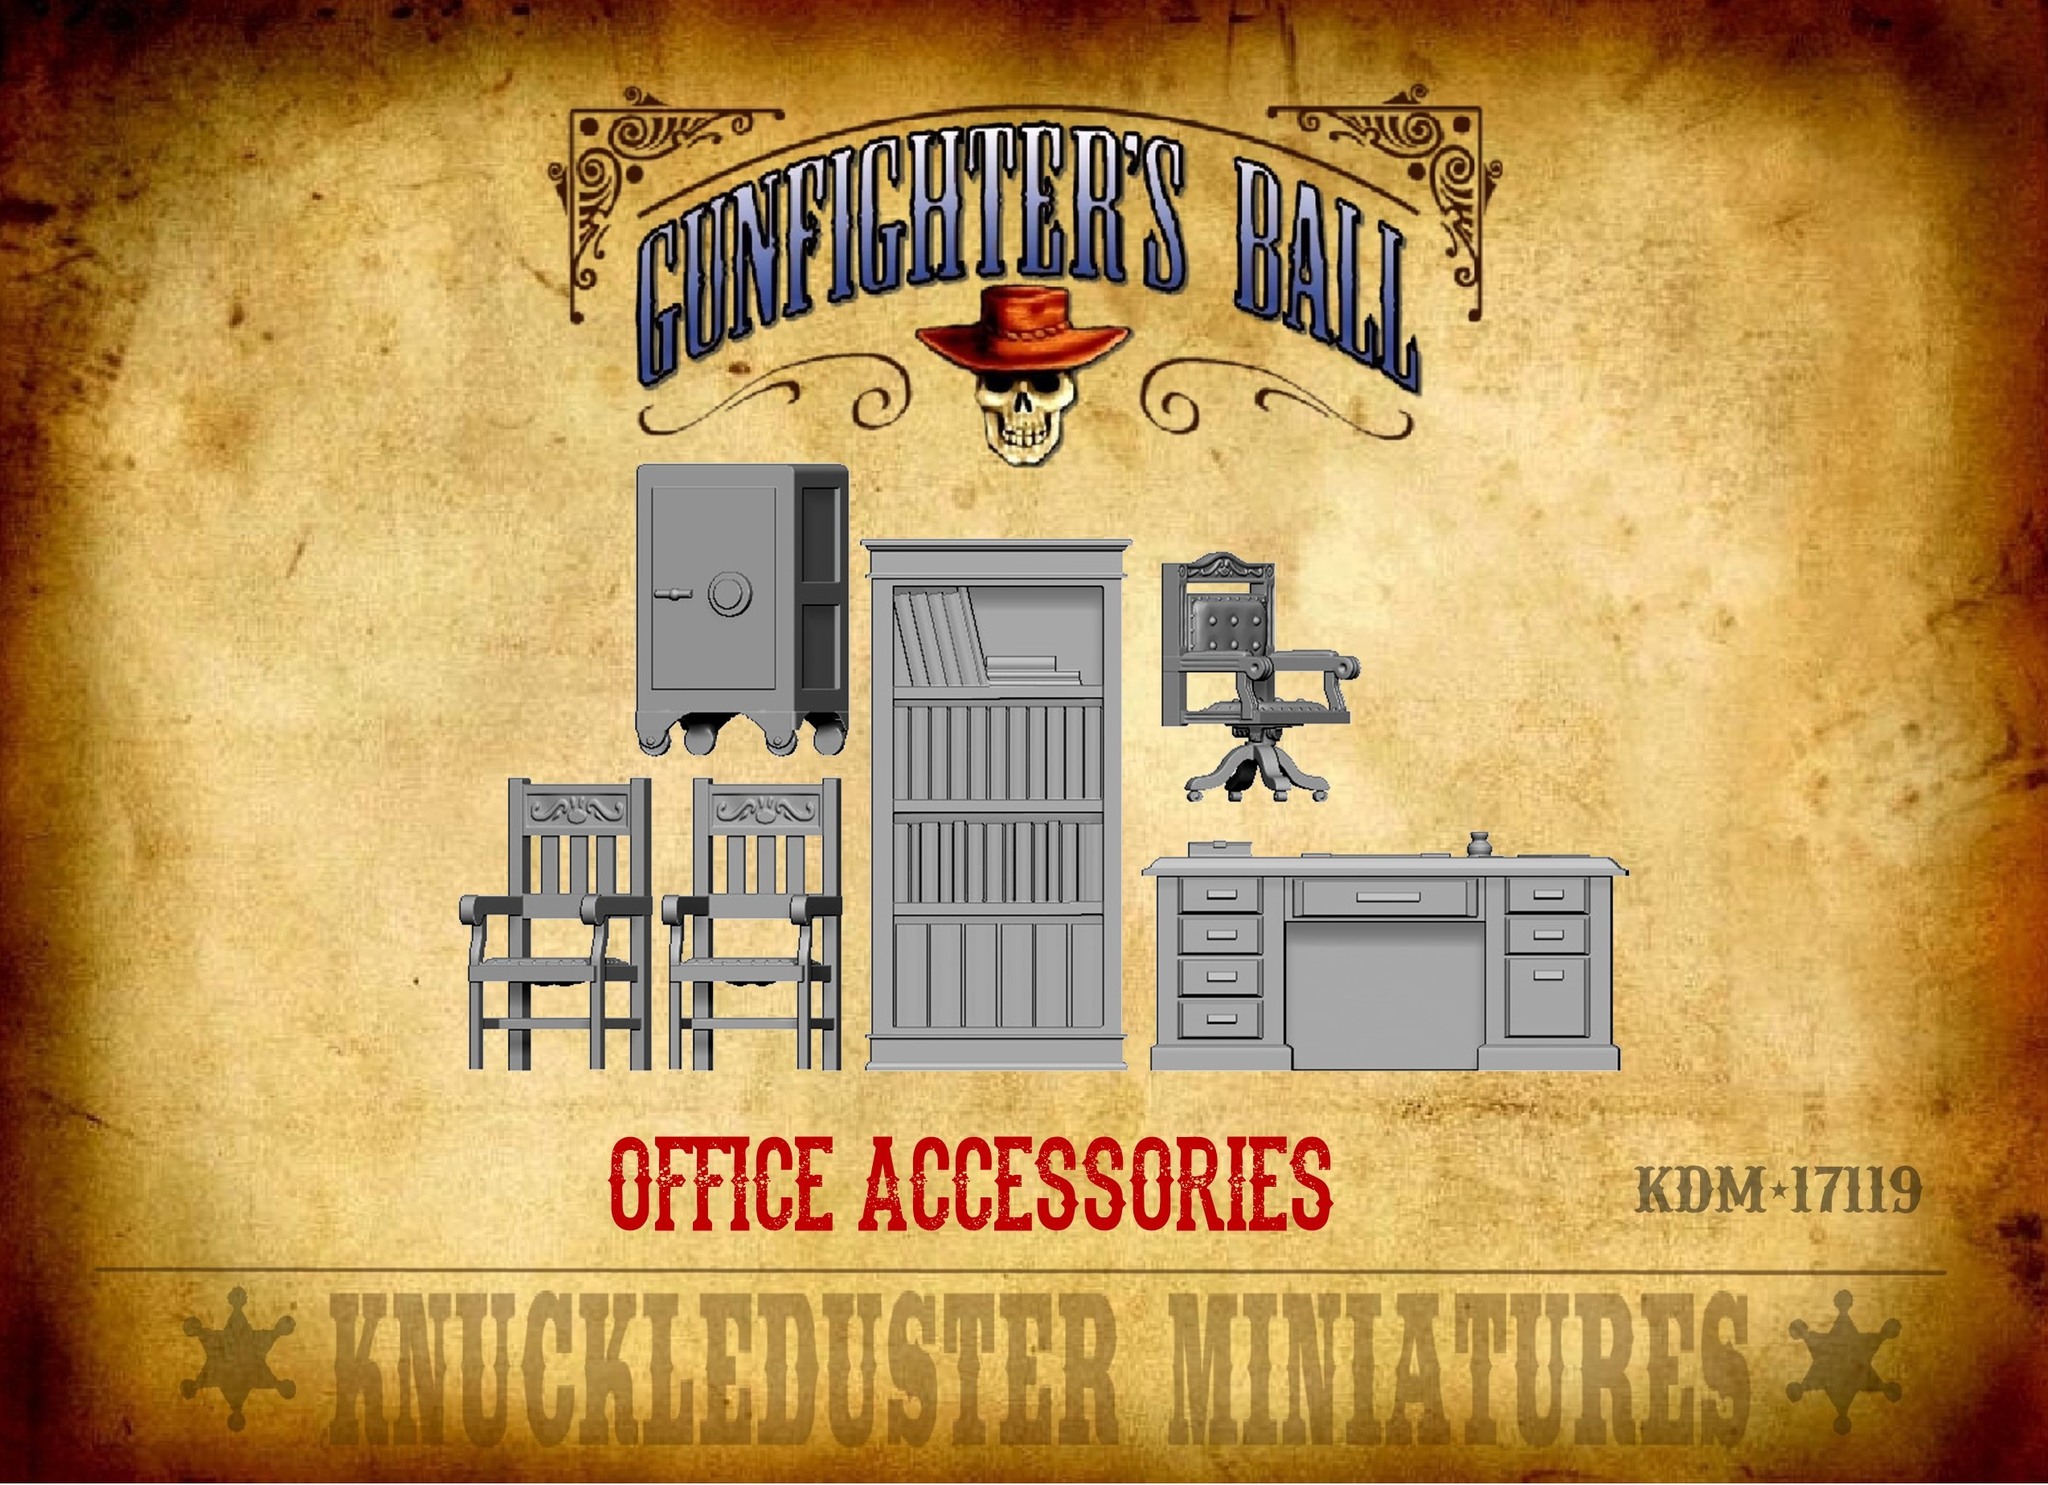 Office Accessories - Knuckleduster Miniatures